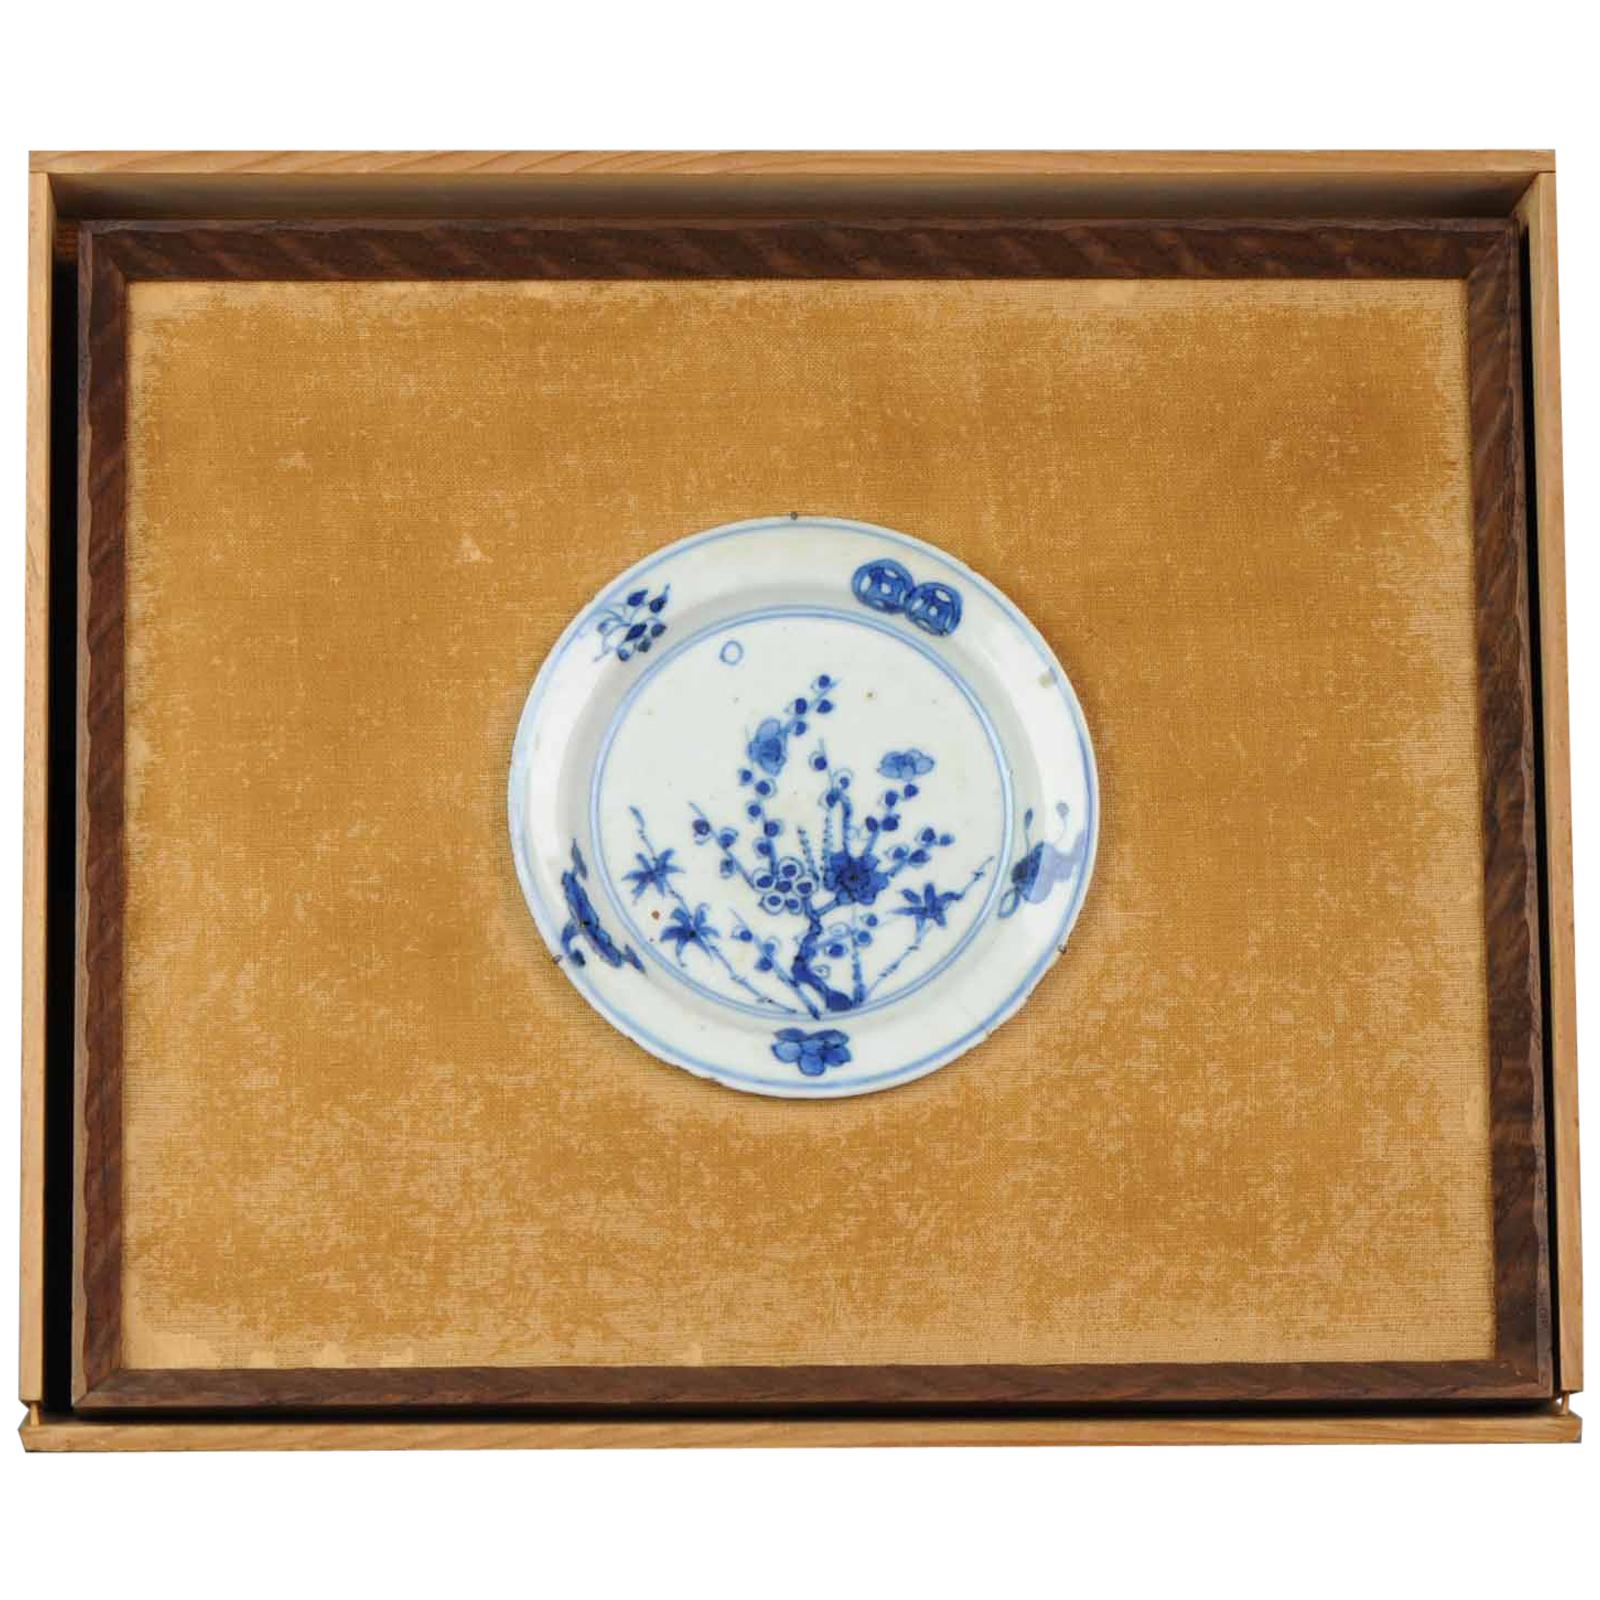 Unusual Framed 17th Century Antique Chinese Porcelain Ming Flowers Plate and Box For Sale